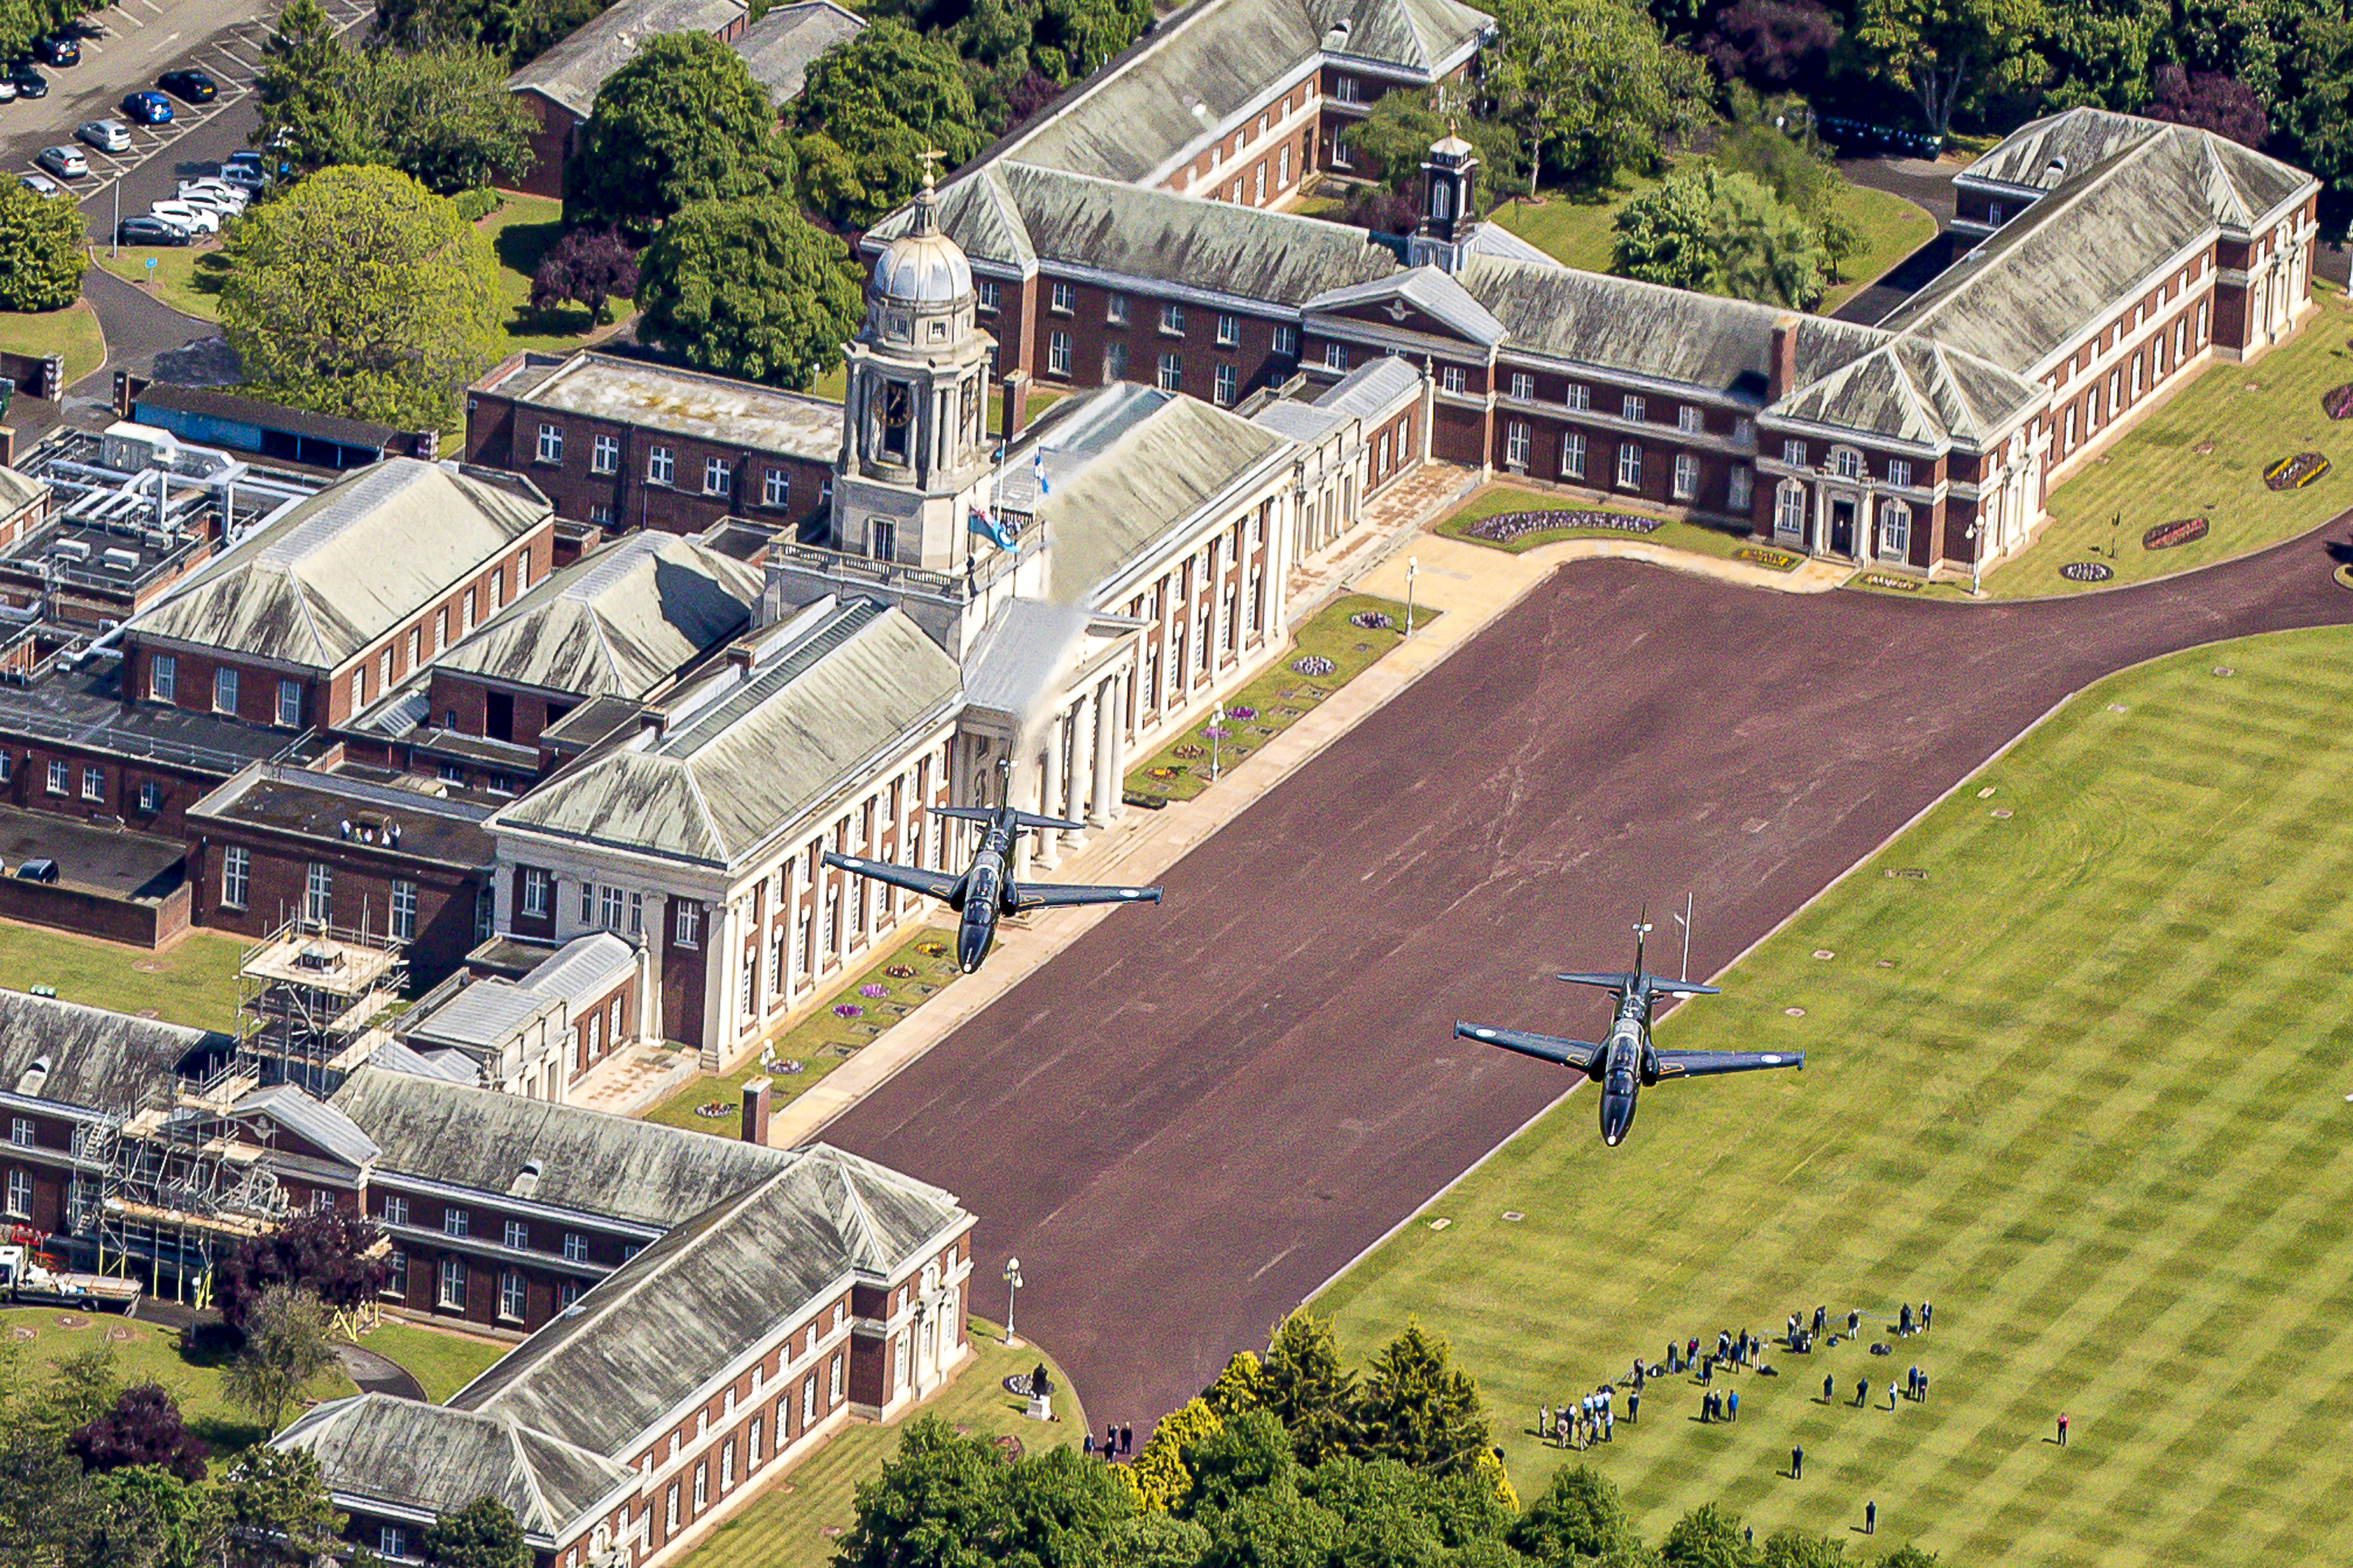 Aircraft in flight over Buckingham Palace.